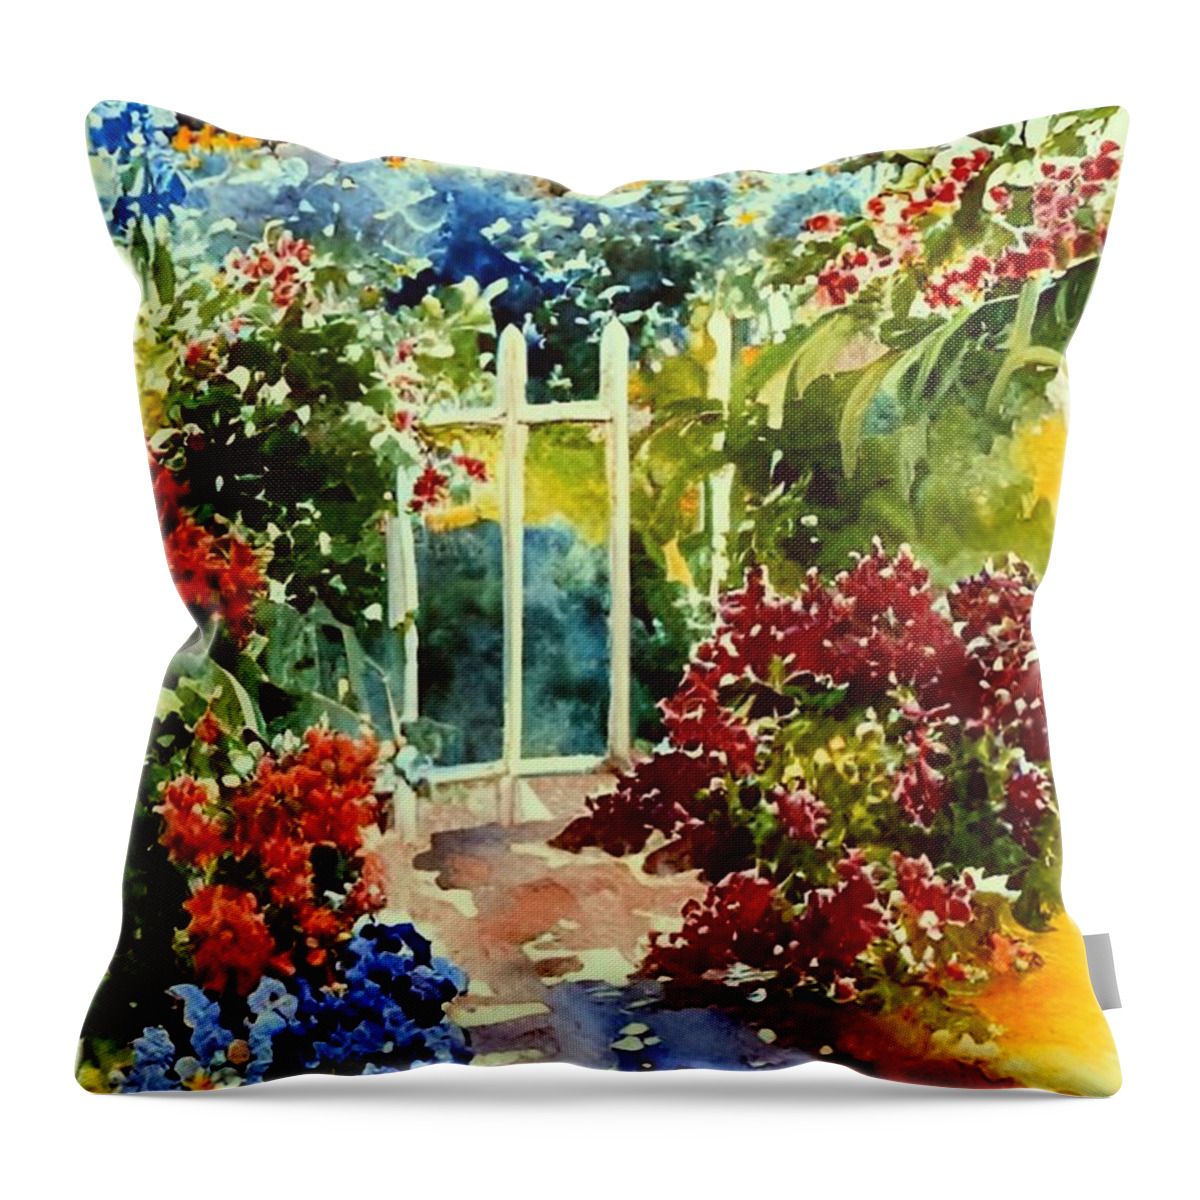 Watercolor Throw Pillow featuring the painting Behind the Garden Gate #1 by Bonnie Bruno